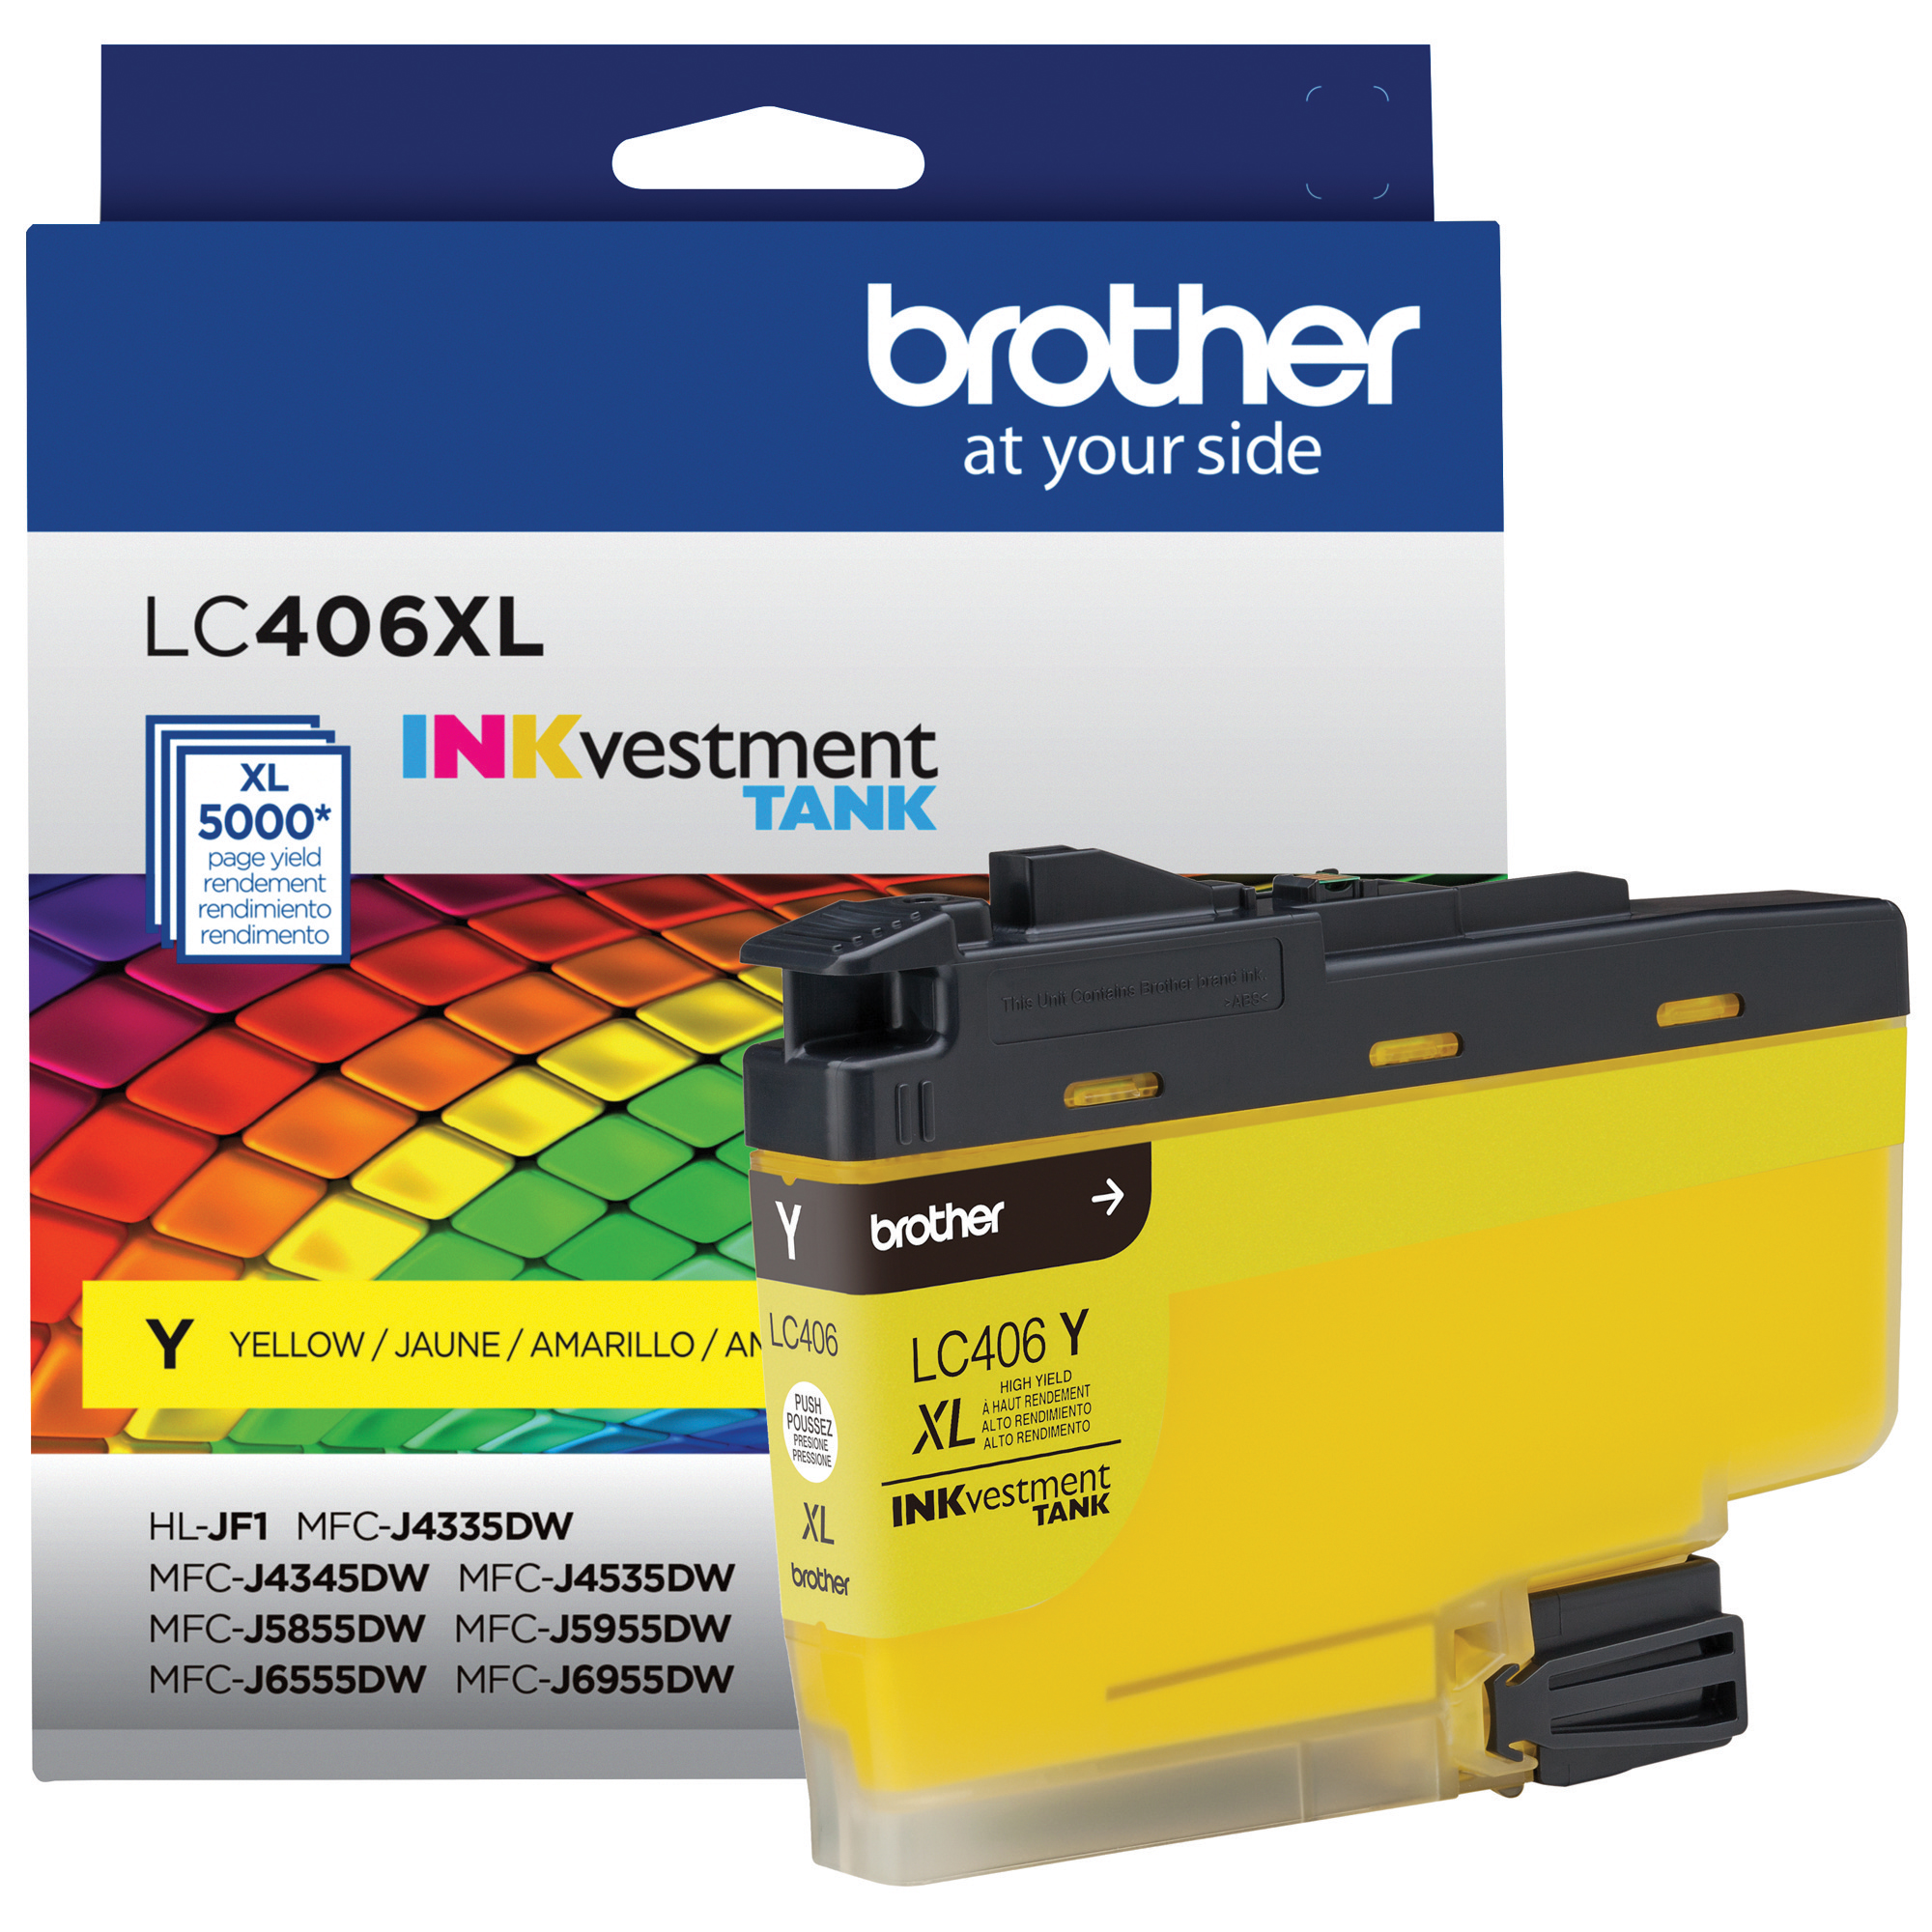 

Brother INKvestment Tank High-yield Ink, Yellow, Yields approx 5,000 pages